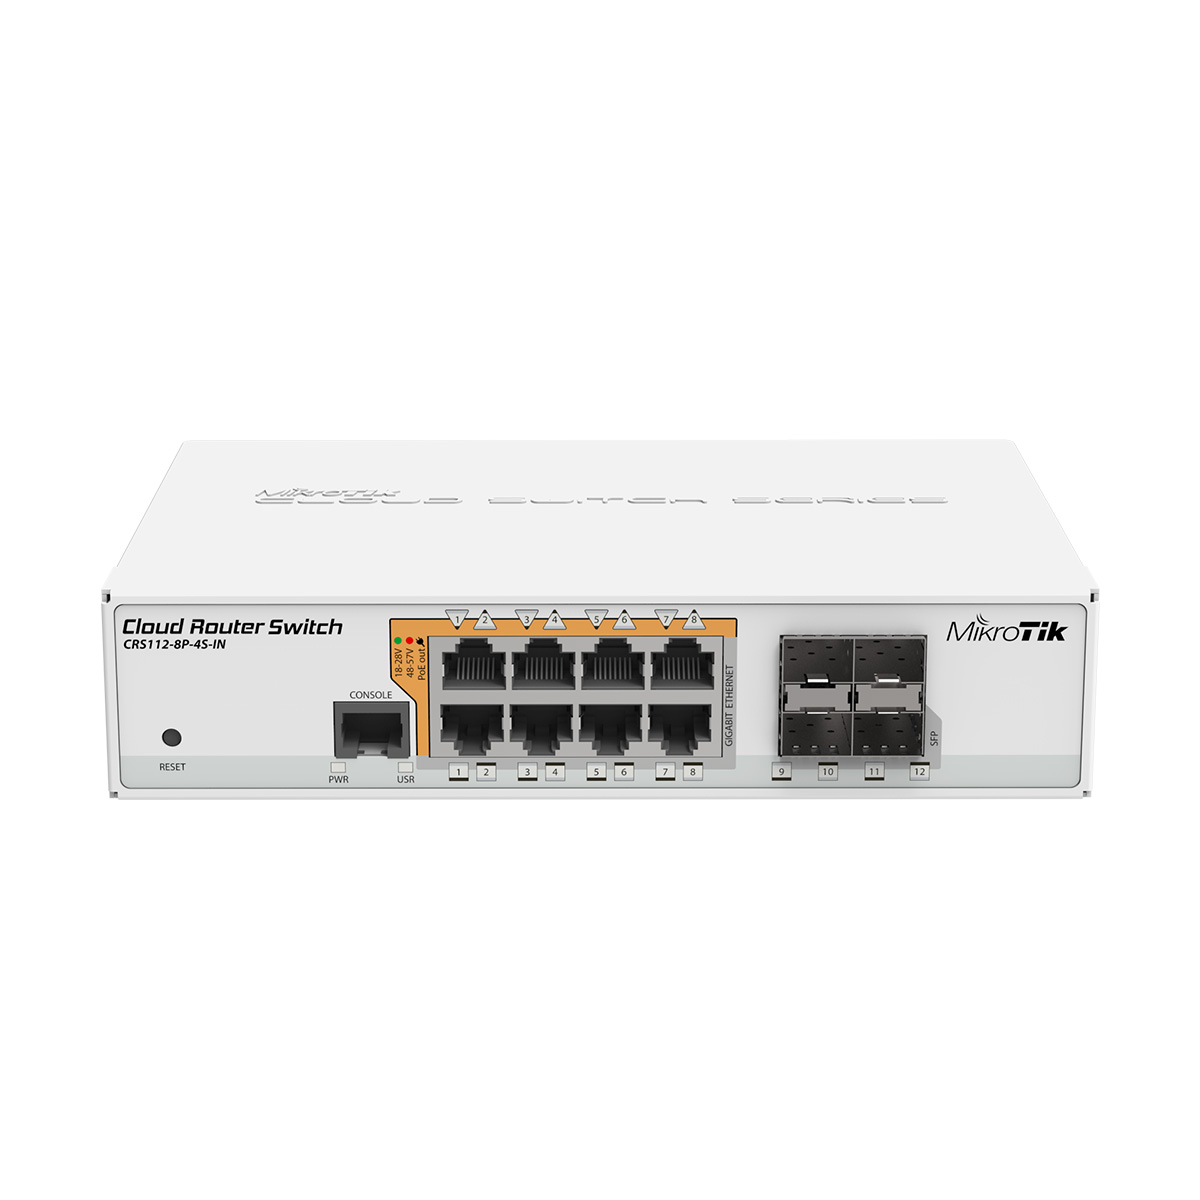 MikroTik Cloud Router Switch CRS112, 8-Port 4-SFP – CRS112-8P-4S-IN